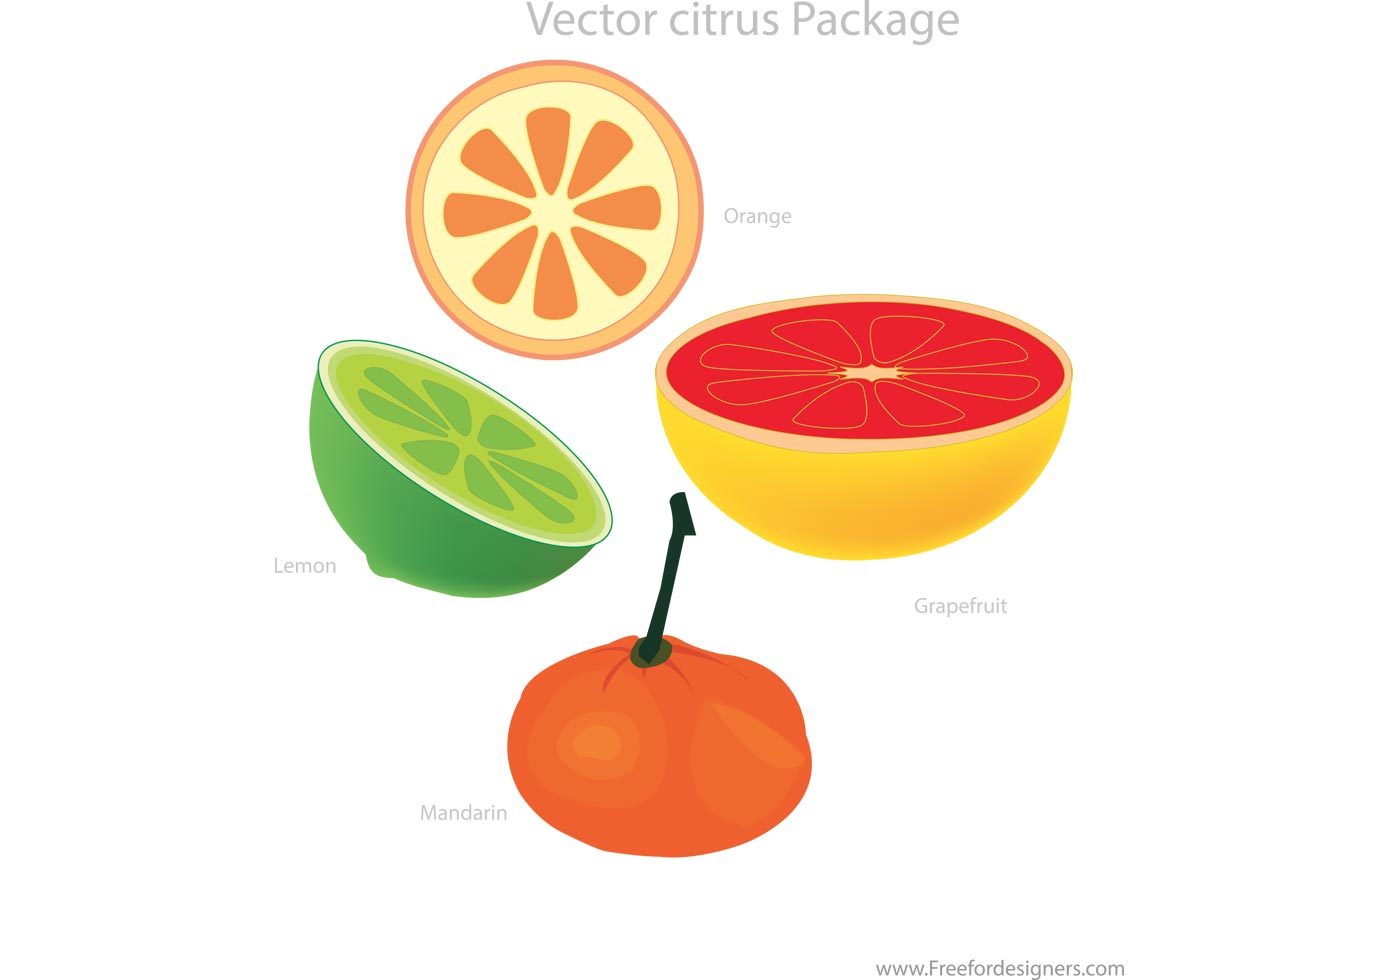 vector clipart packages - photo #43